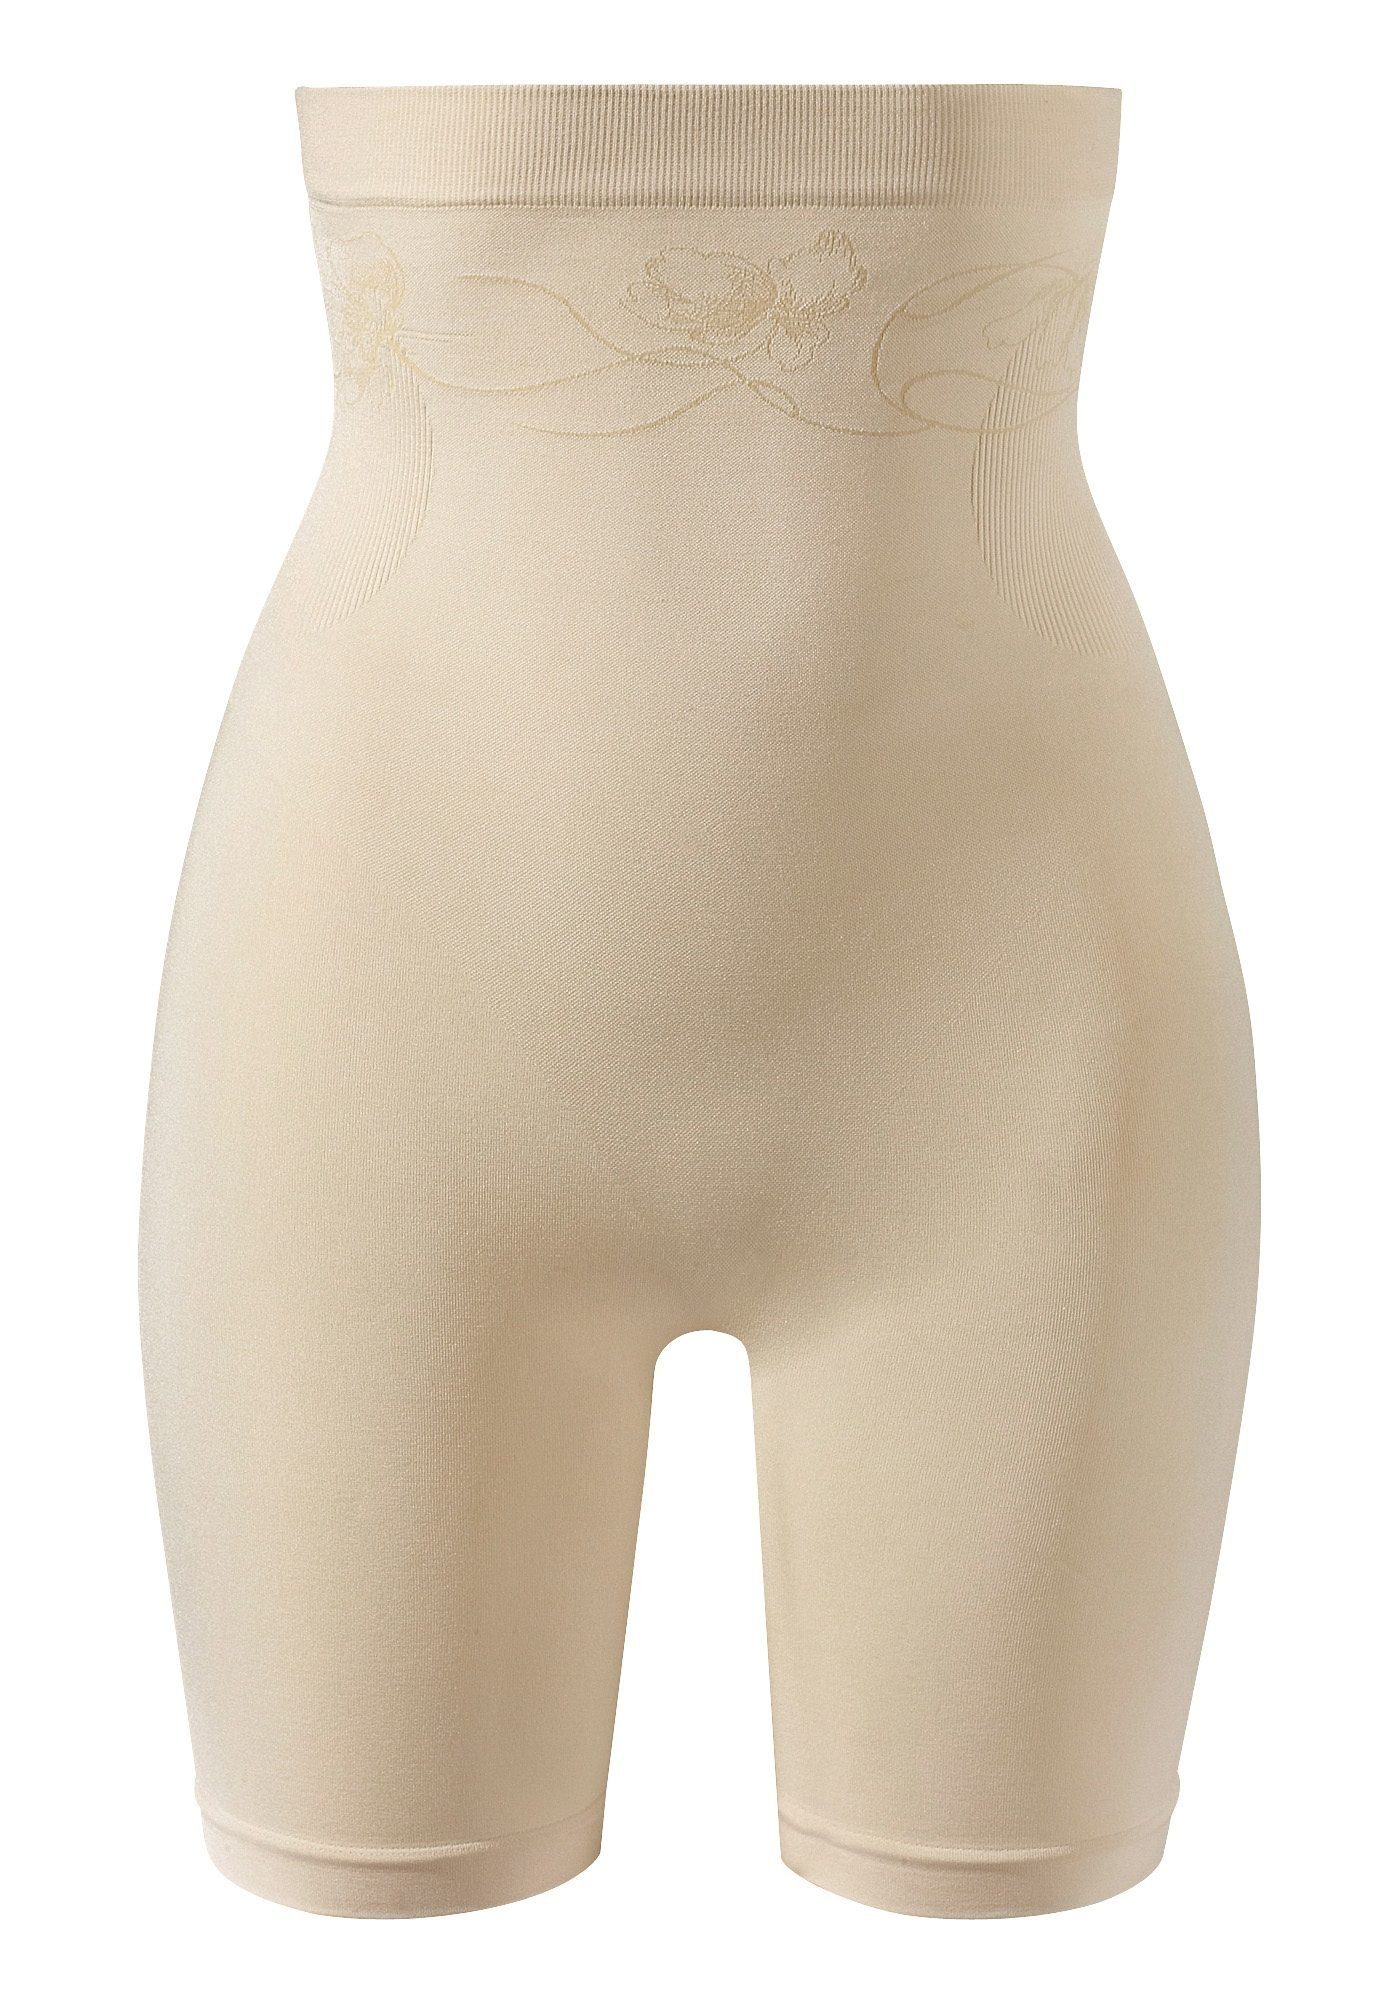 hoher Taille, Shapinghose SEAMLESS mit Basic champagner Dessous LASCANA